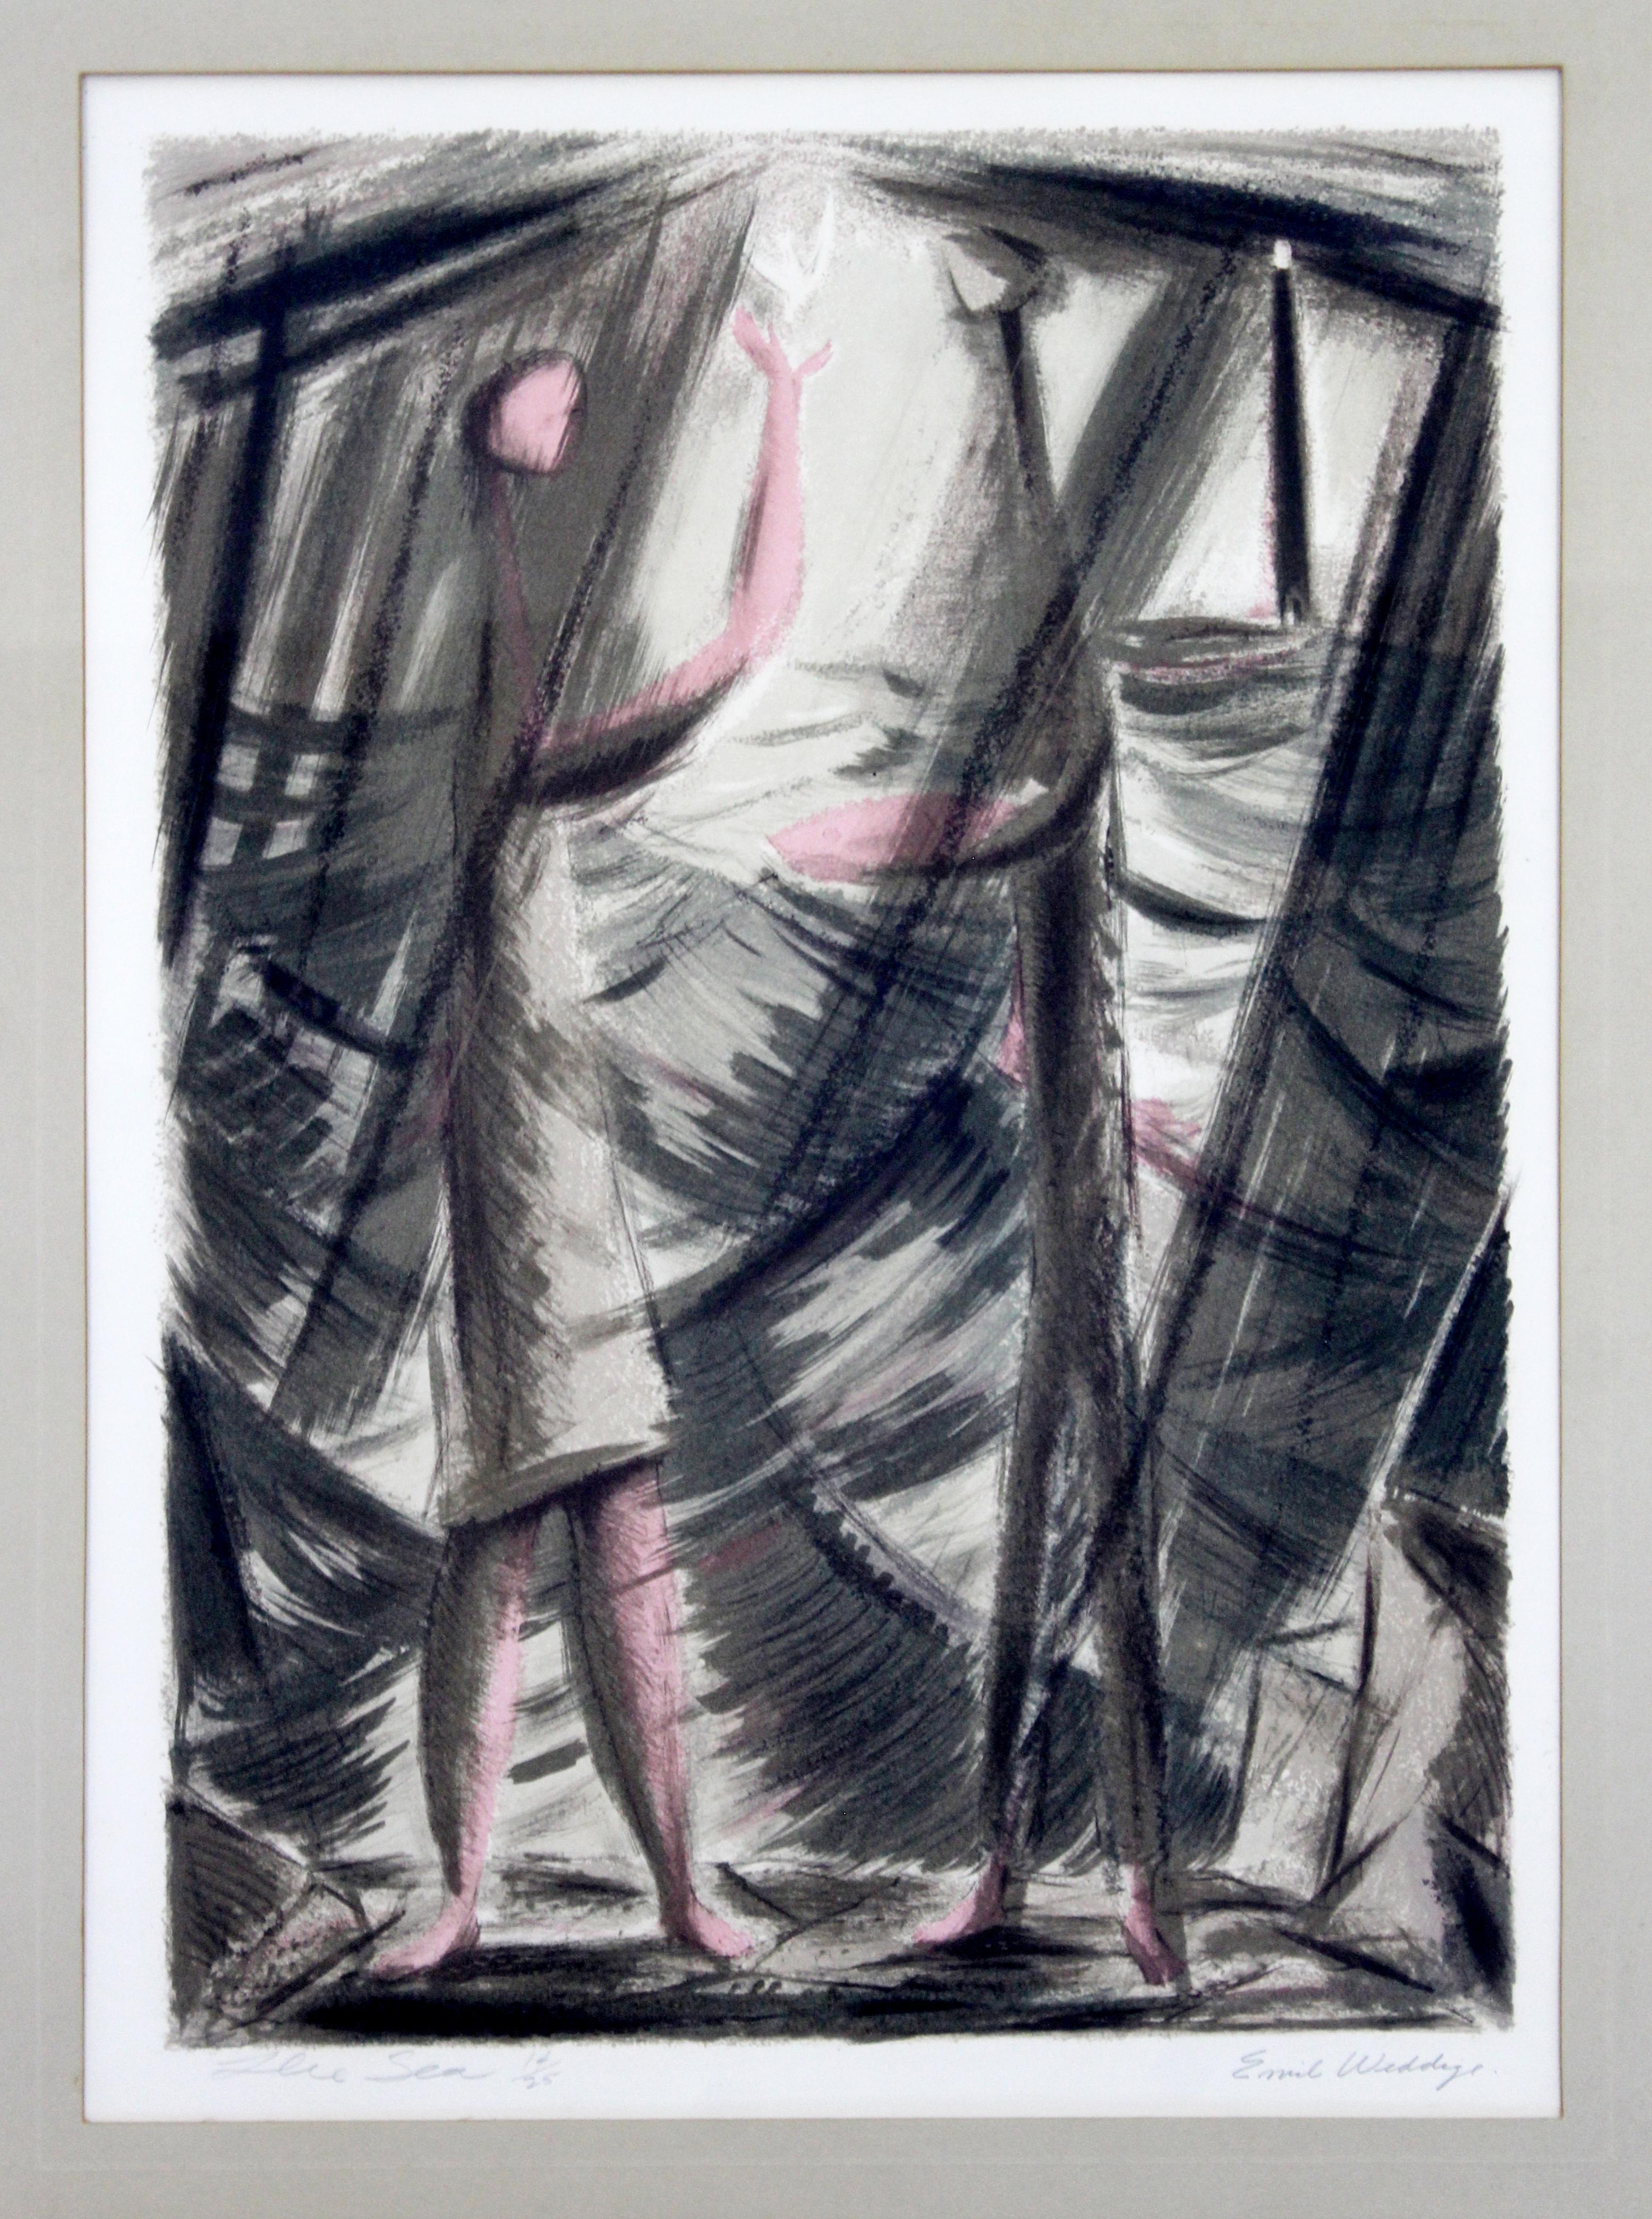 For your consideration is a wonderful, signed and numbered lithograph by Emil Weddige, entitled 